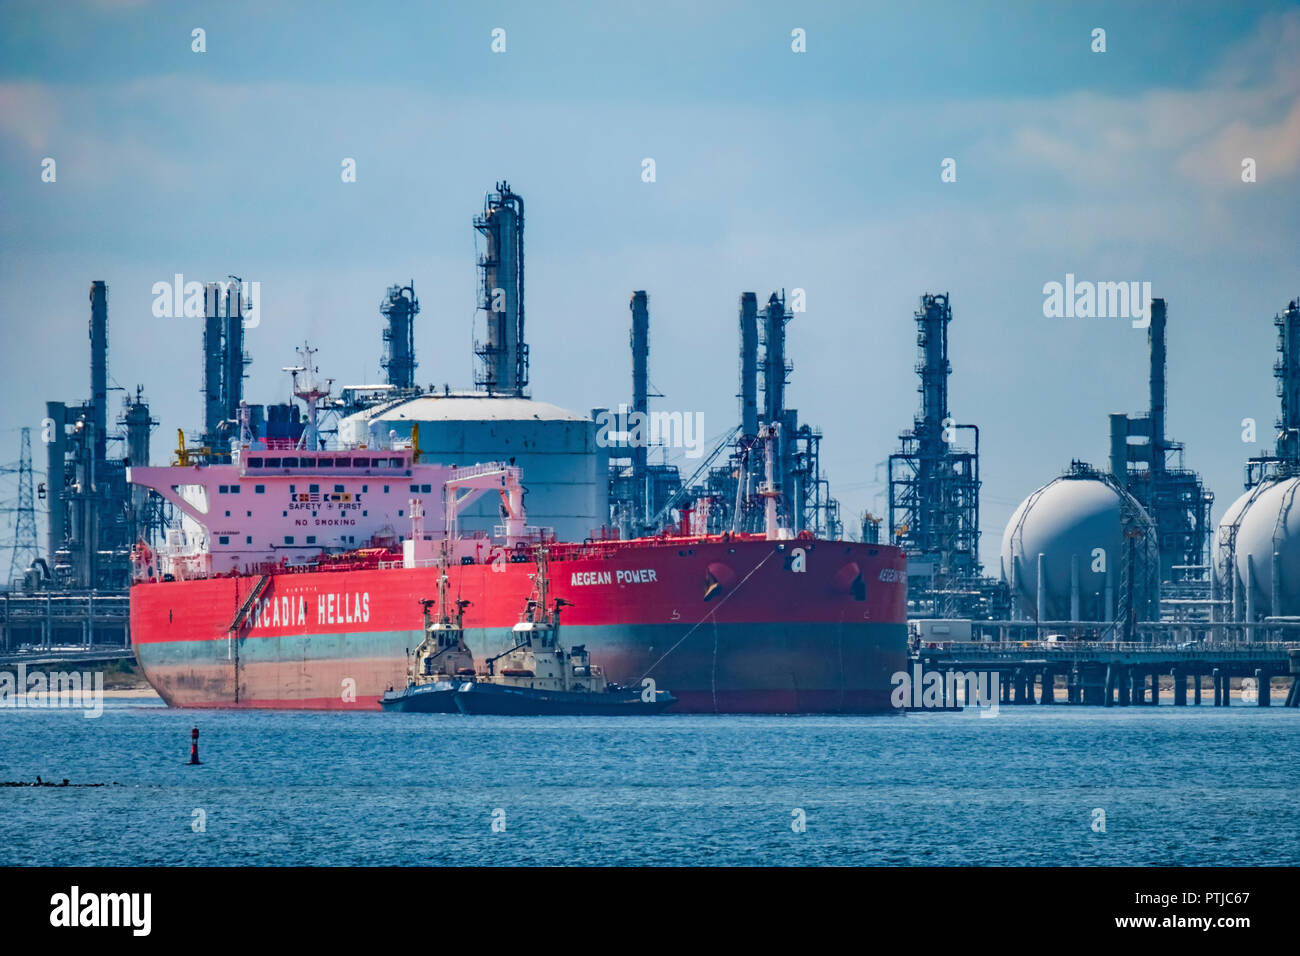 The crude oil tanker Aegean Power is brought into Seal Sands port by four tugs. Stock Photo